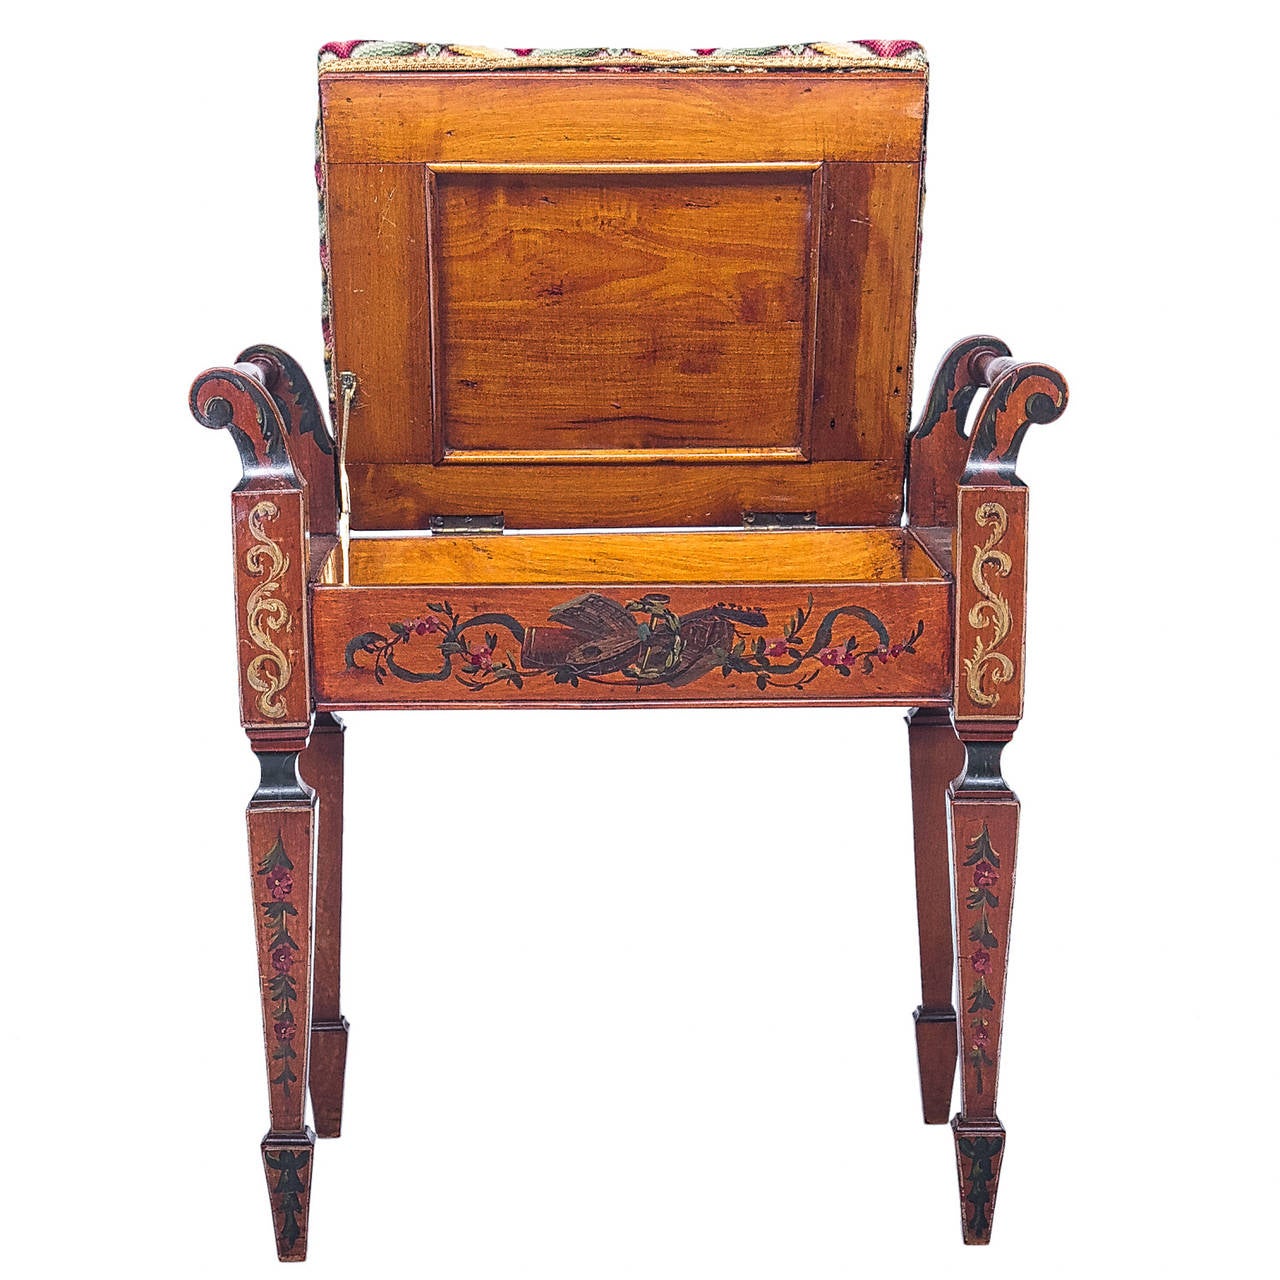 A fine and elegant satinwood bench with a lift seat. This bench has been hand-painted with a trophy design to the front apron, legs with bell flowers, supports with acanthus leaf, and all-over paintings. A striking work of art. There are two rolled